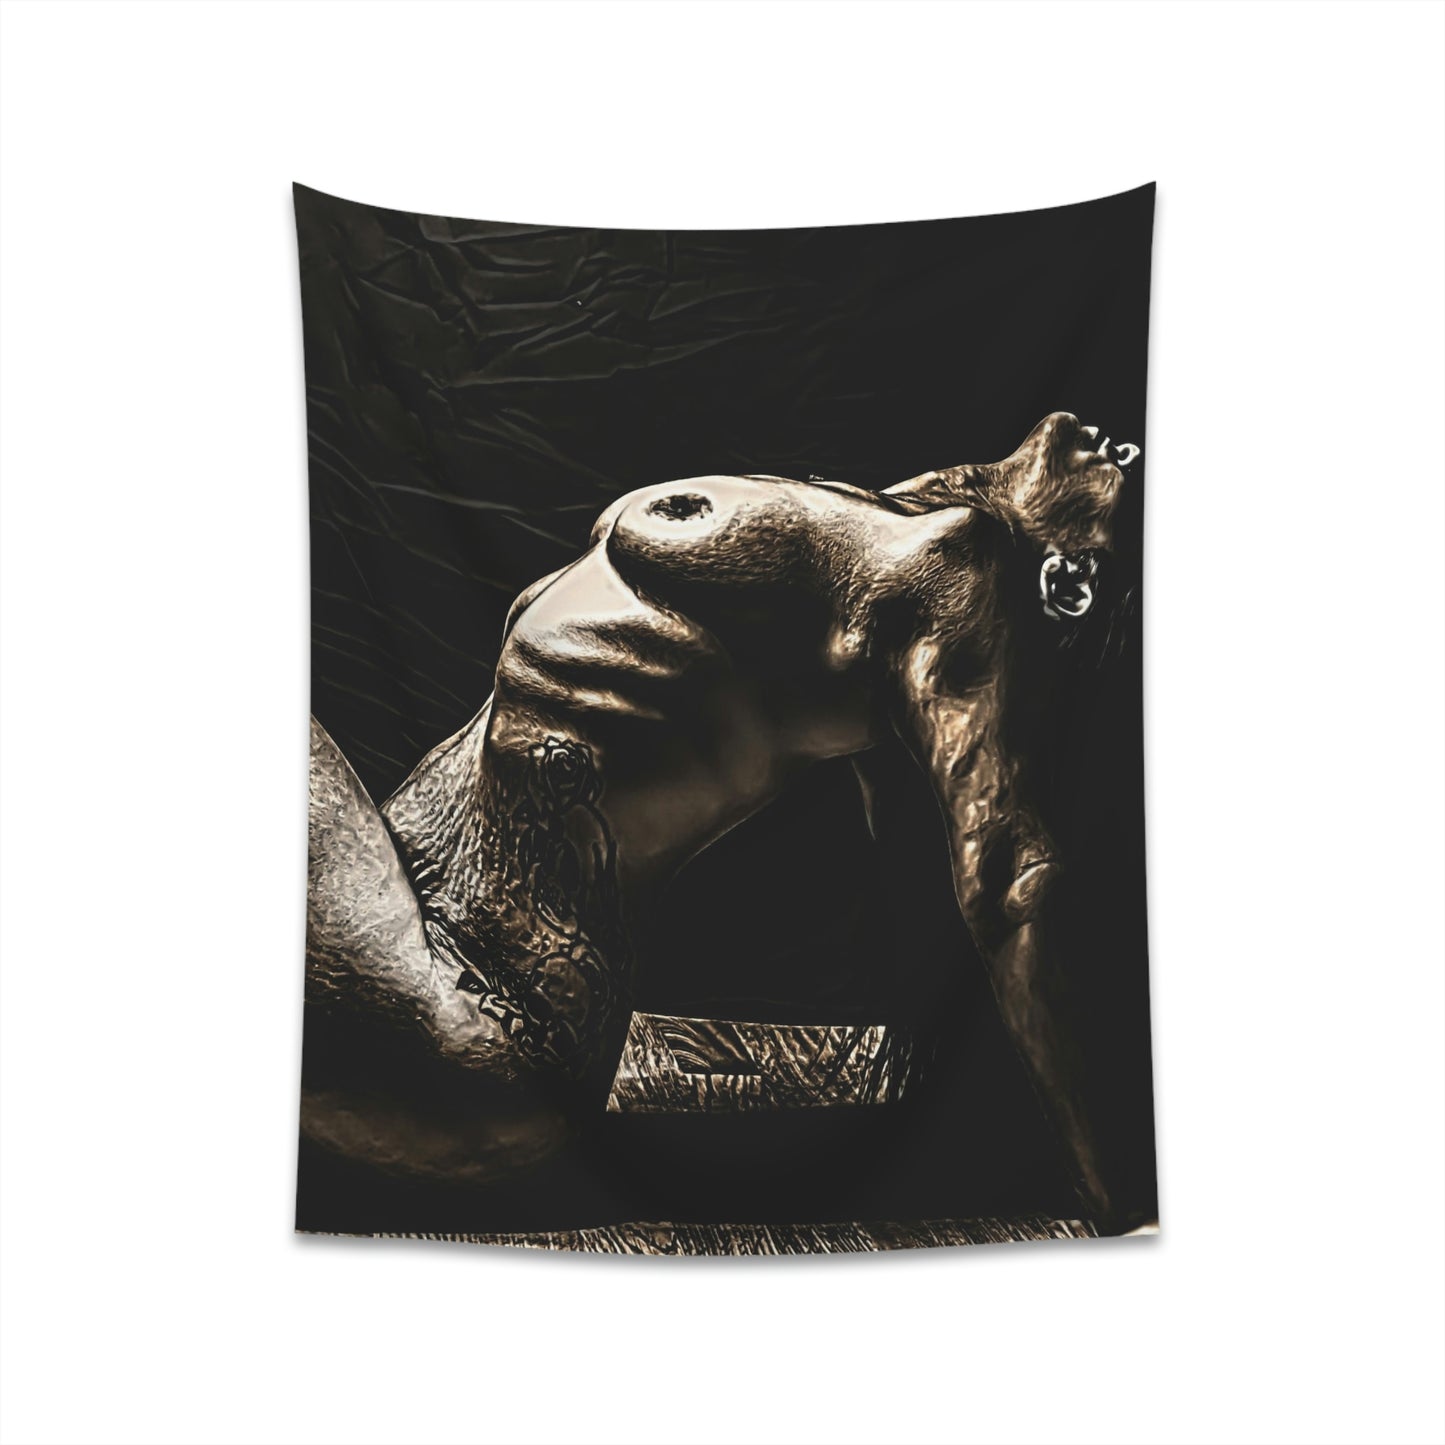 Bronzed Printed Wall Tapestry